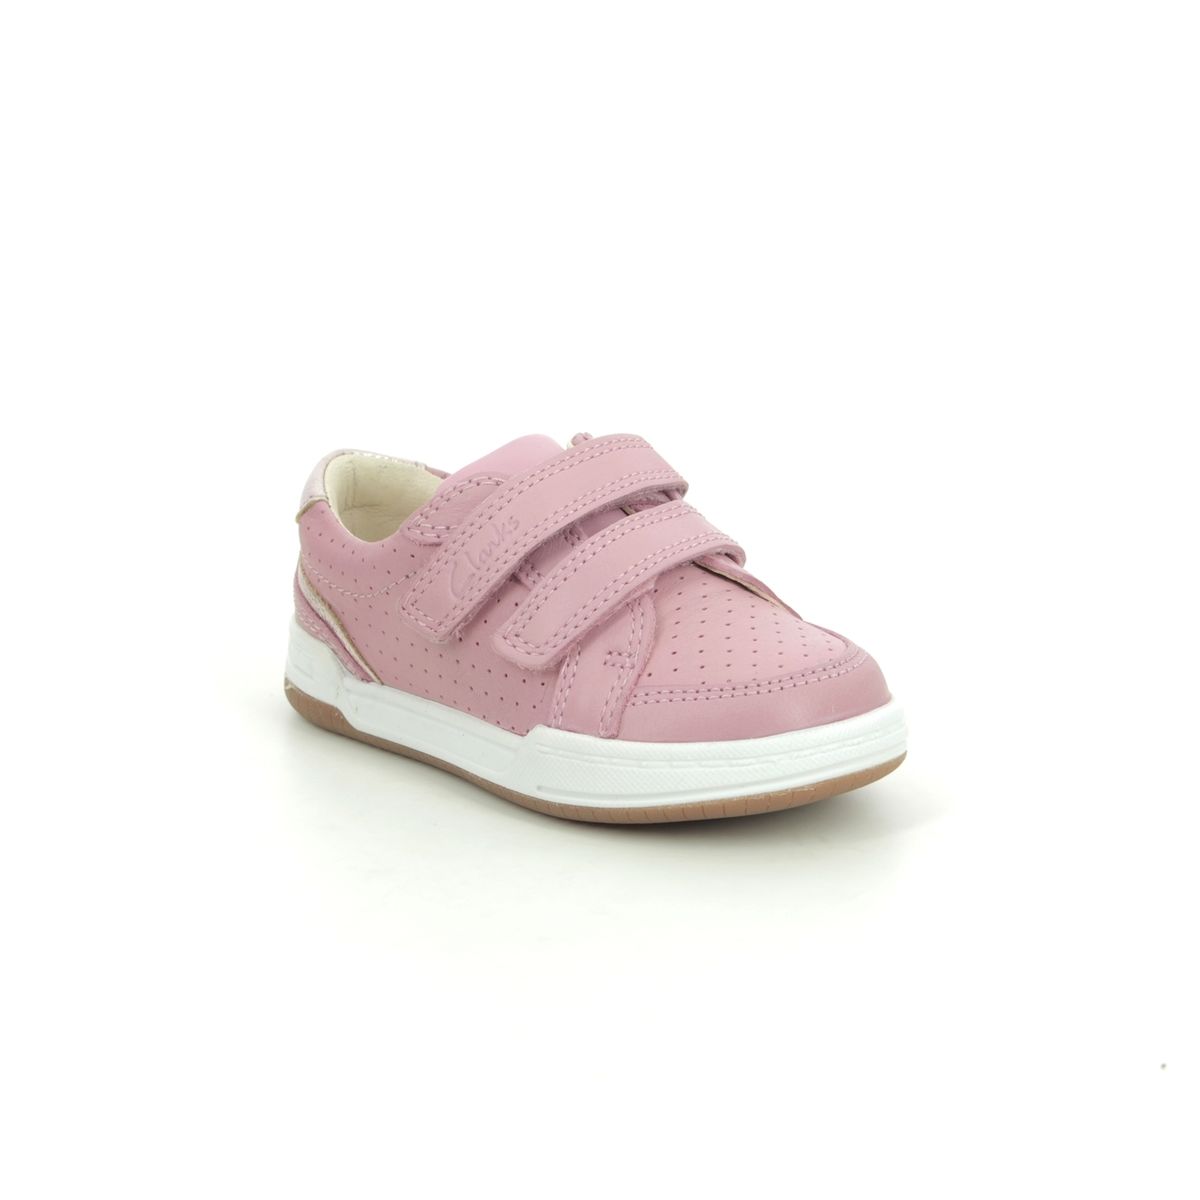 Clarks Fawn Solo T Pink Leather Kids first shoes 5898-95E in a Plain Leather in Size 6